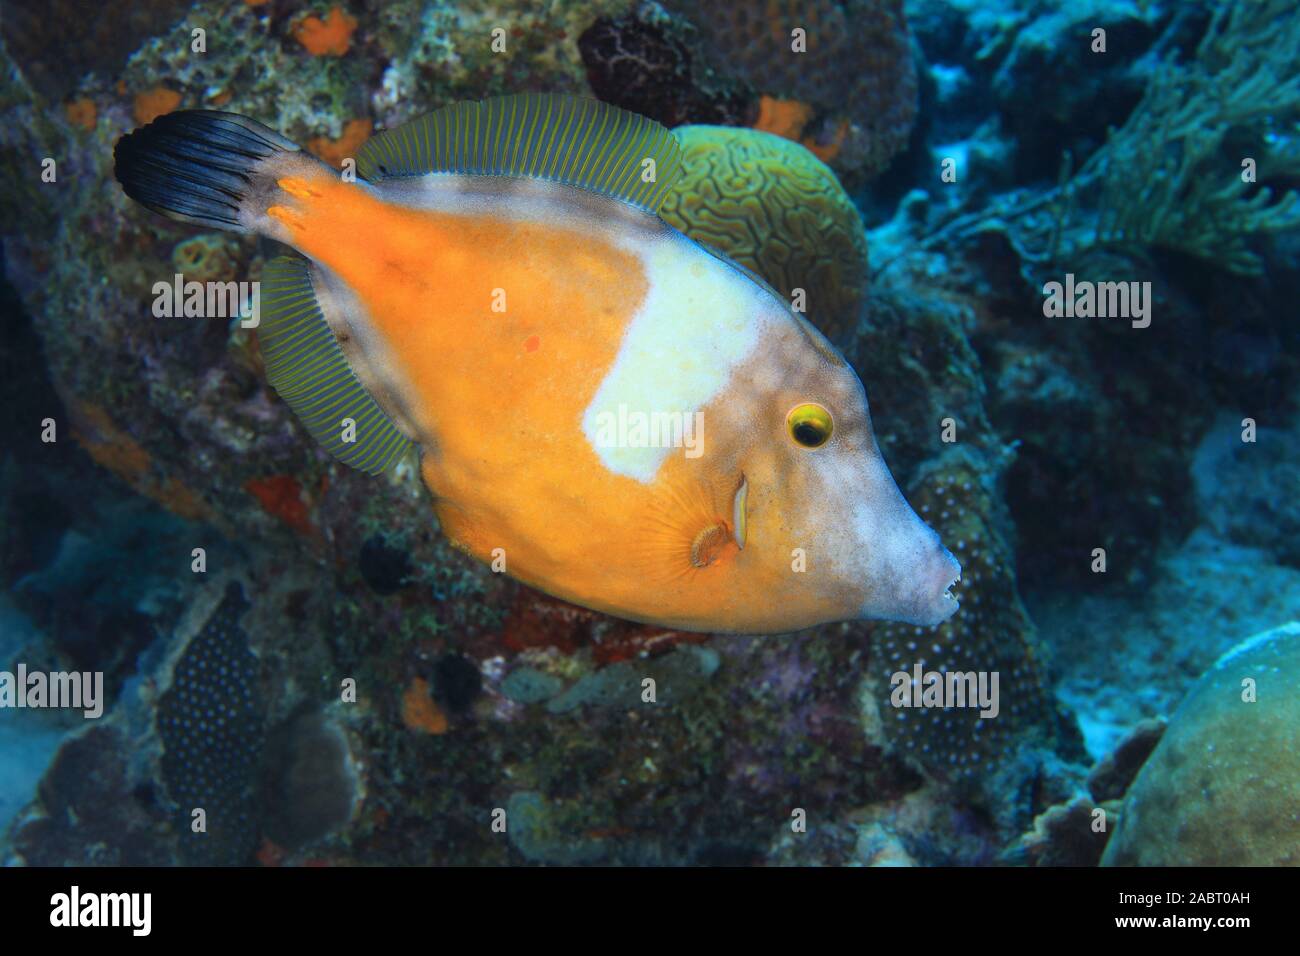 American whitespotted filefish (Cantherhines macrocerus) underwater in the caribbean sea of Bonaire Stock Photo